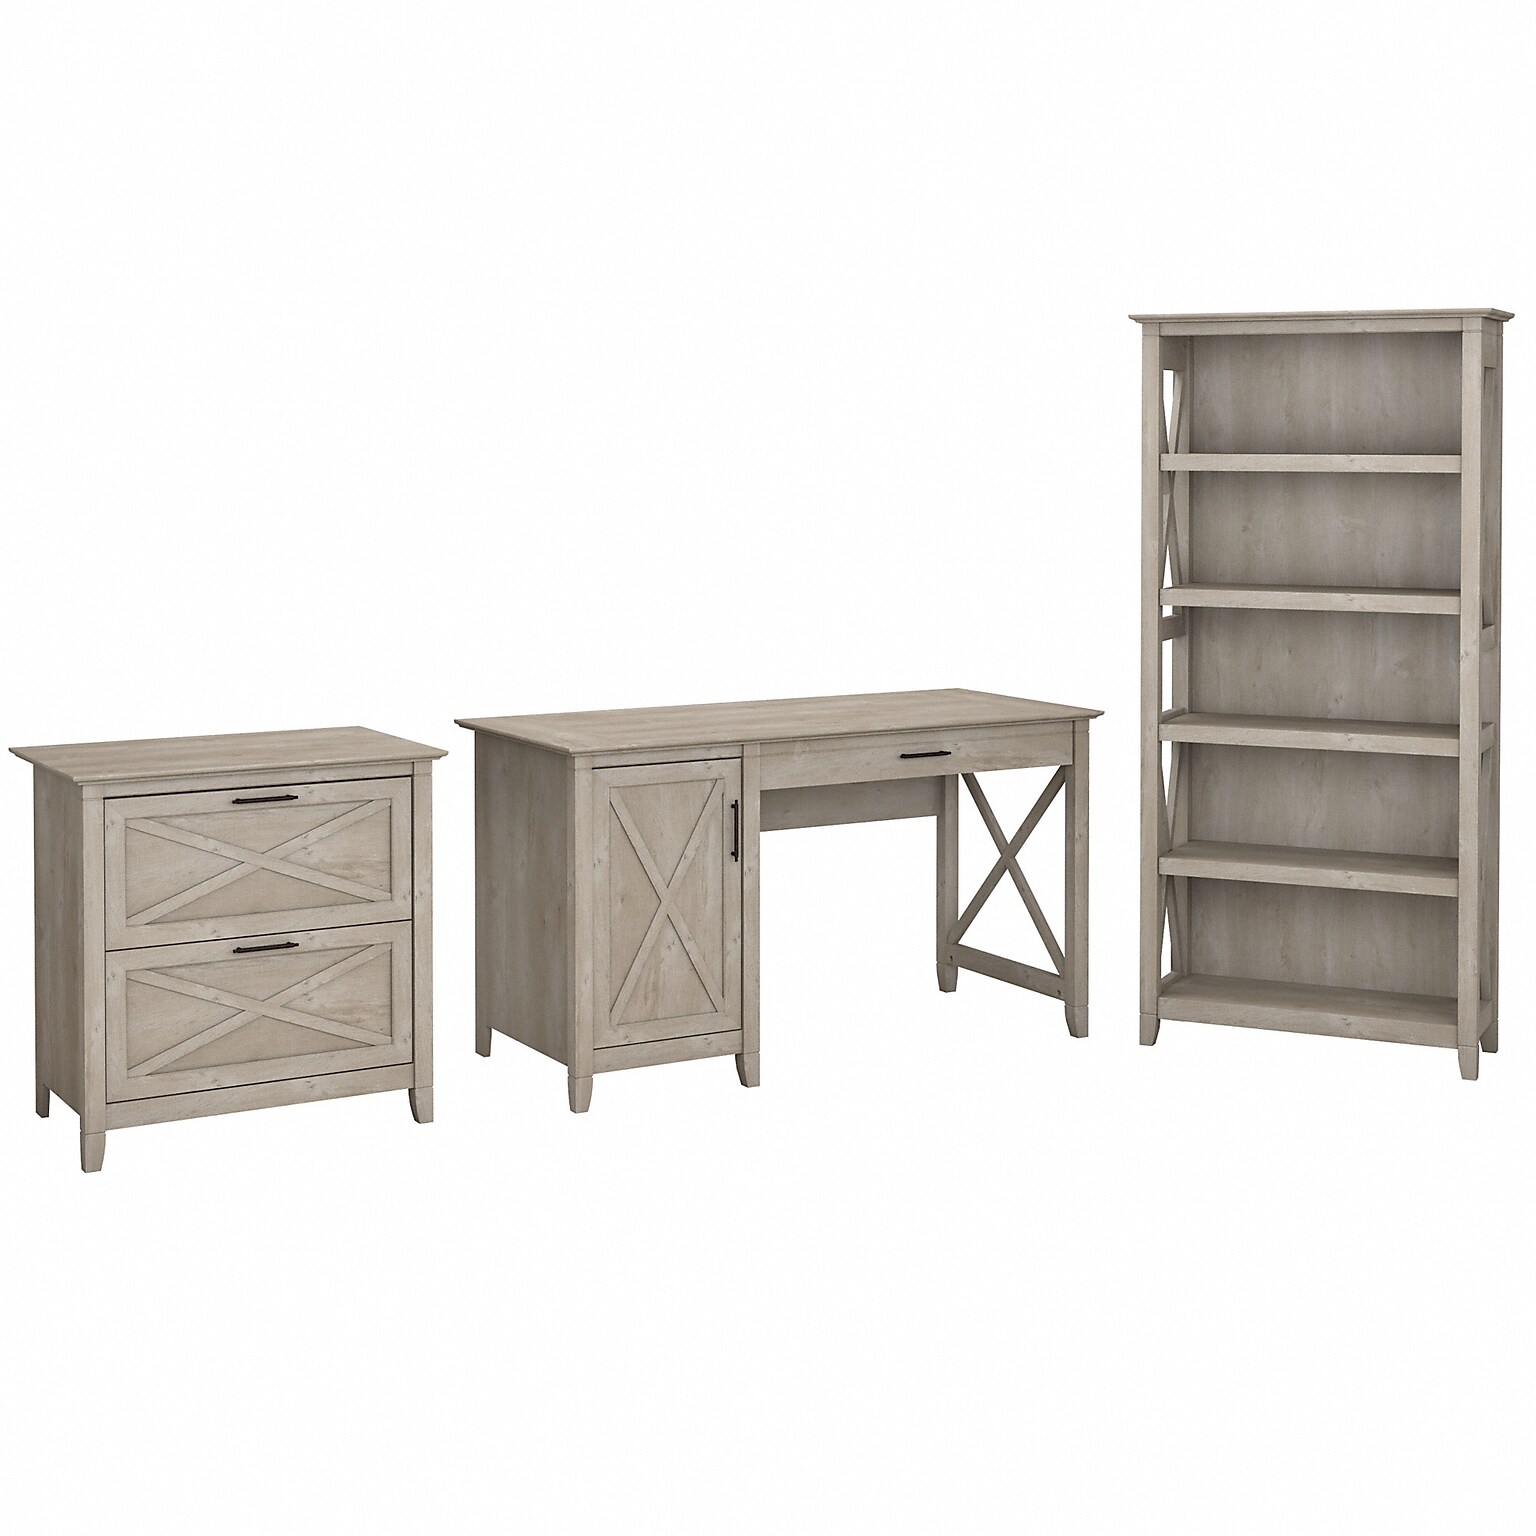 Bush Furniture Key West 54W Single Pedestal Desk with Lateral File and 5 Shelf Bookcase, Washed Gray (KWS009WG)